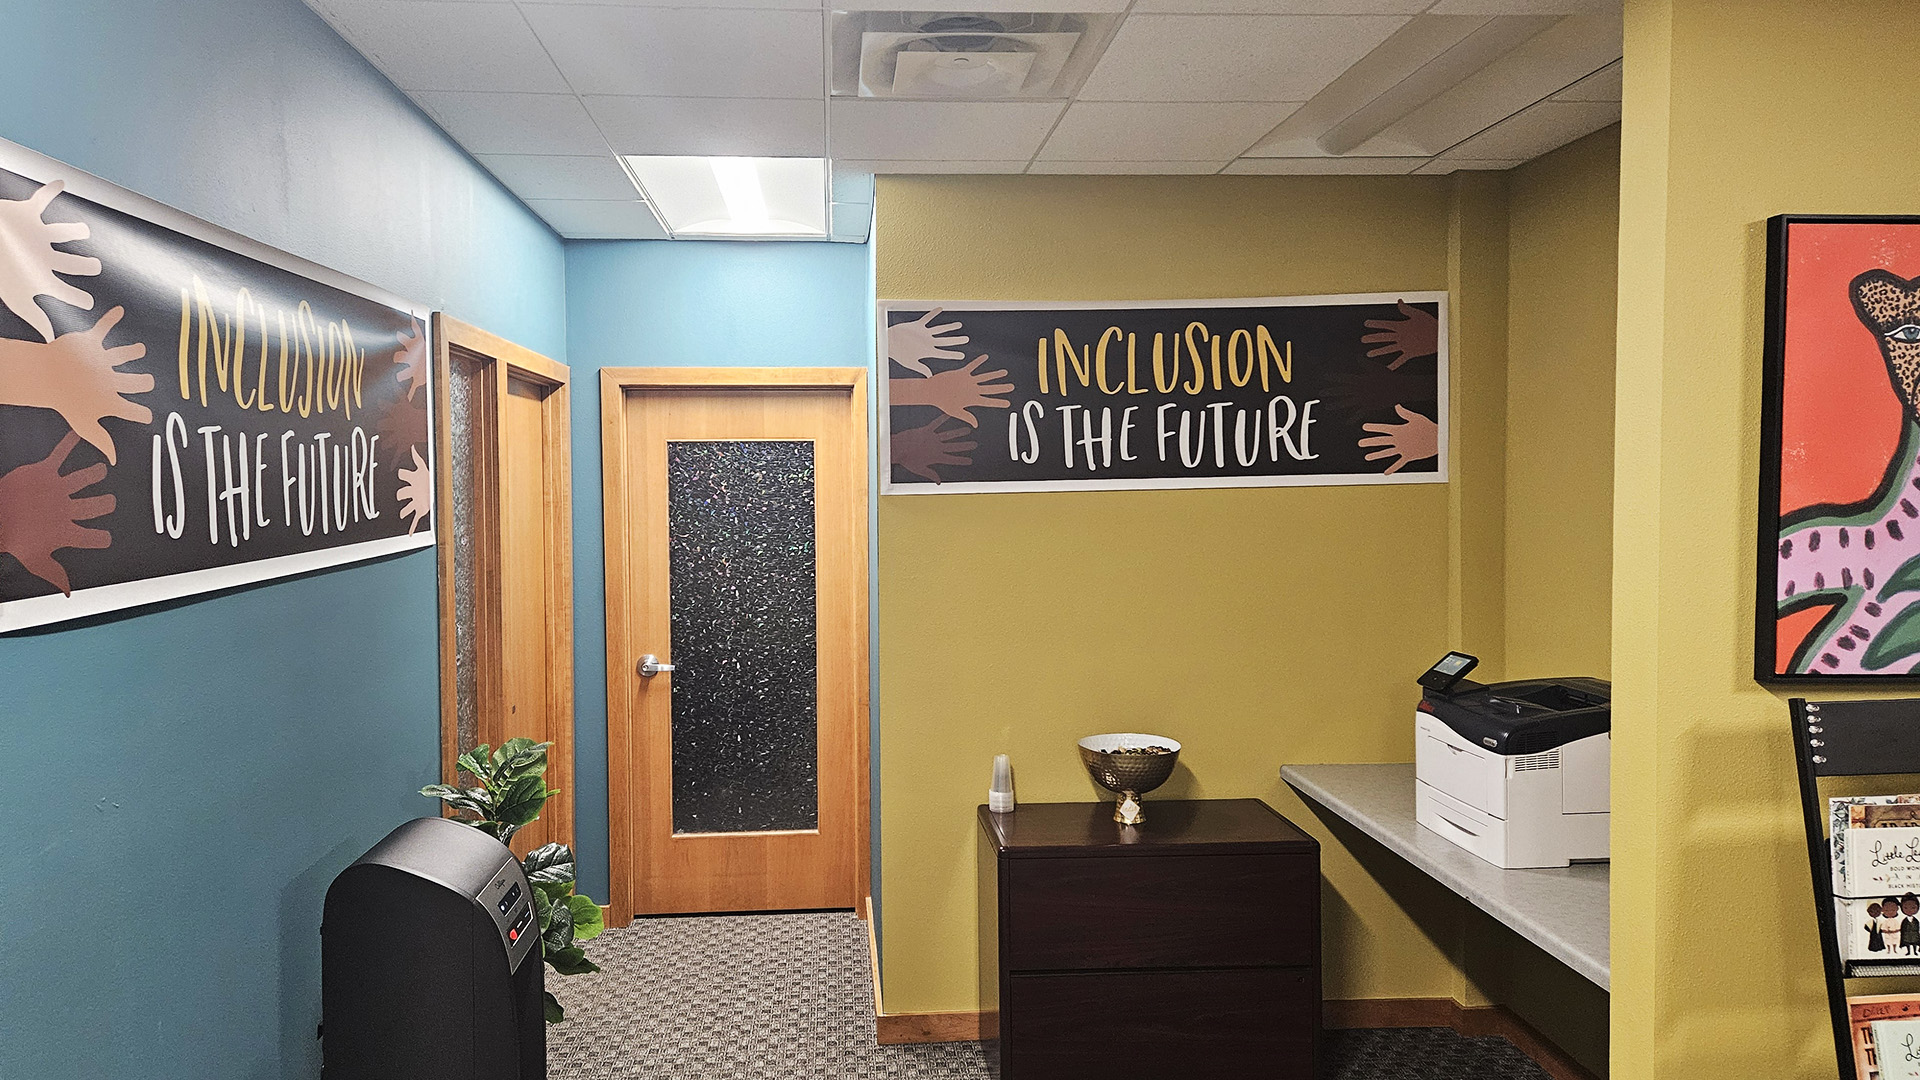 Vinyl signs with illustrated hands in different skin tones and with the words "Inclusion Is the Future" are attached to multiple walls of an office, with a printer on a wall-mounted table next to a wood stand with a bowl on its surface and multiple wood doors with craquelure glass windows.